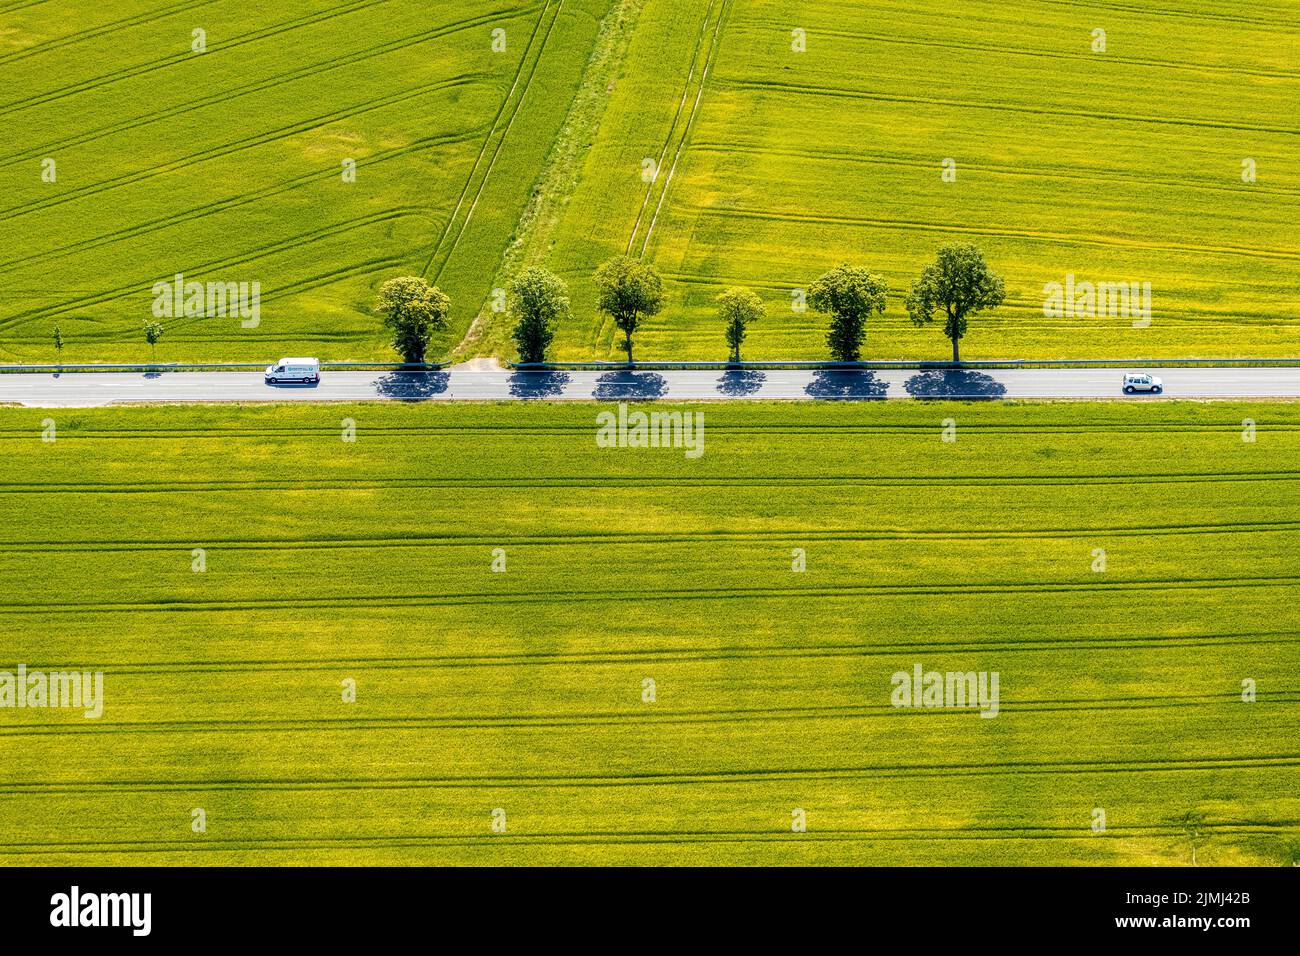 Aerial view, row of trees on country road, federal road 229, Langenholthausen, Balve, Sauerland, North Rhine-Westphalia, Germany, federal road B229, D Stock Photo